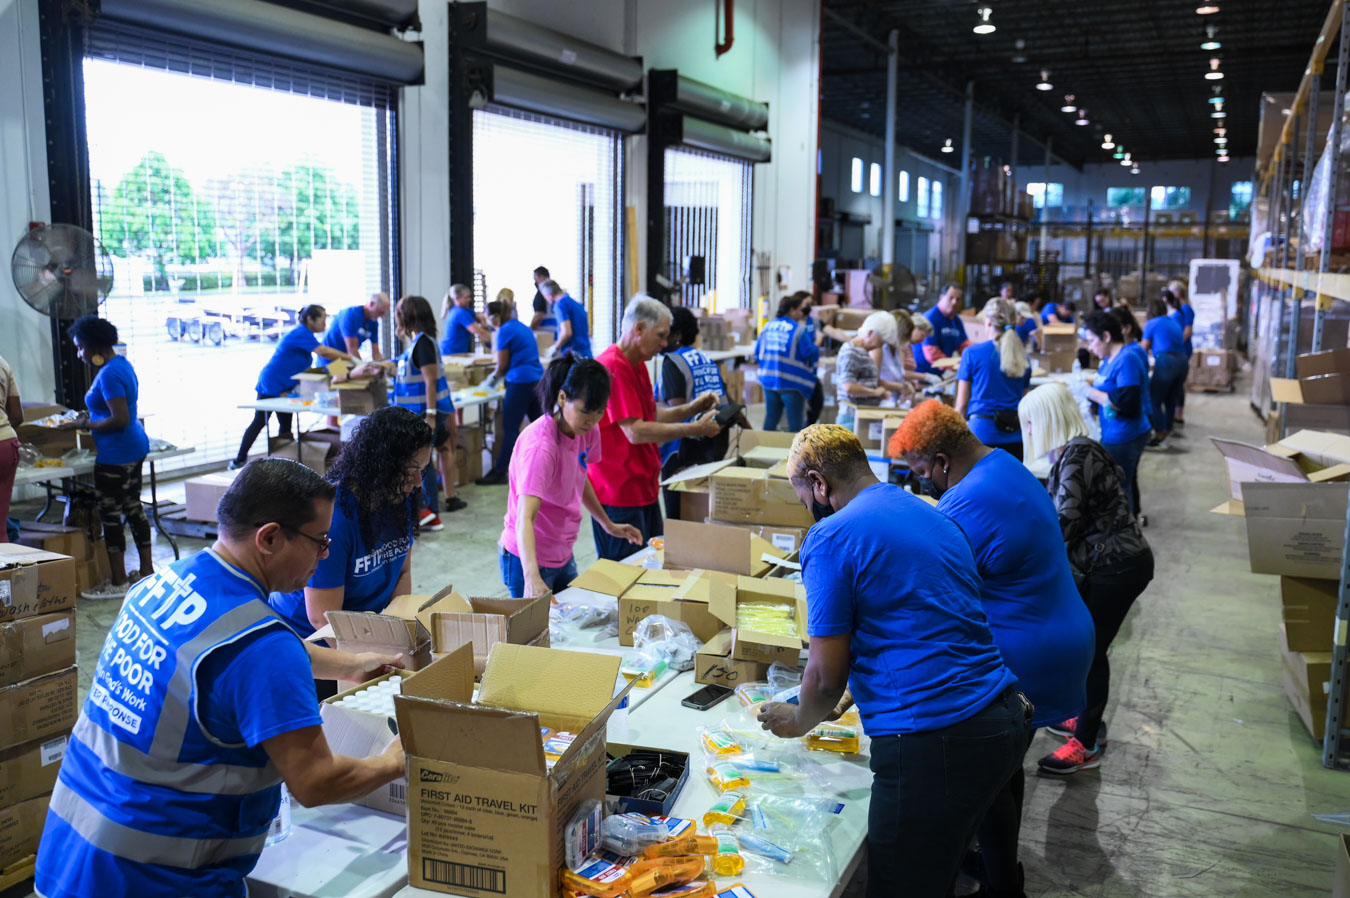 Volunteers at the Heart of Food For The Poor